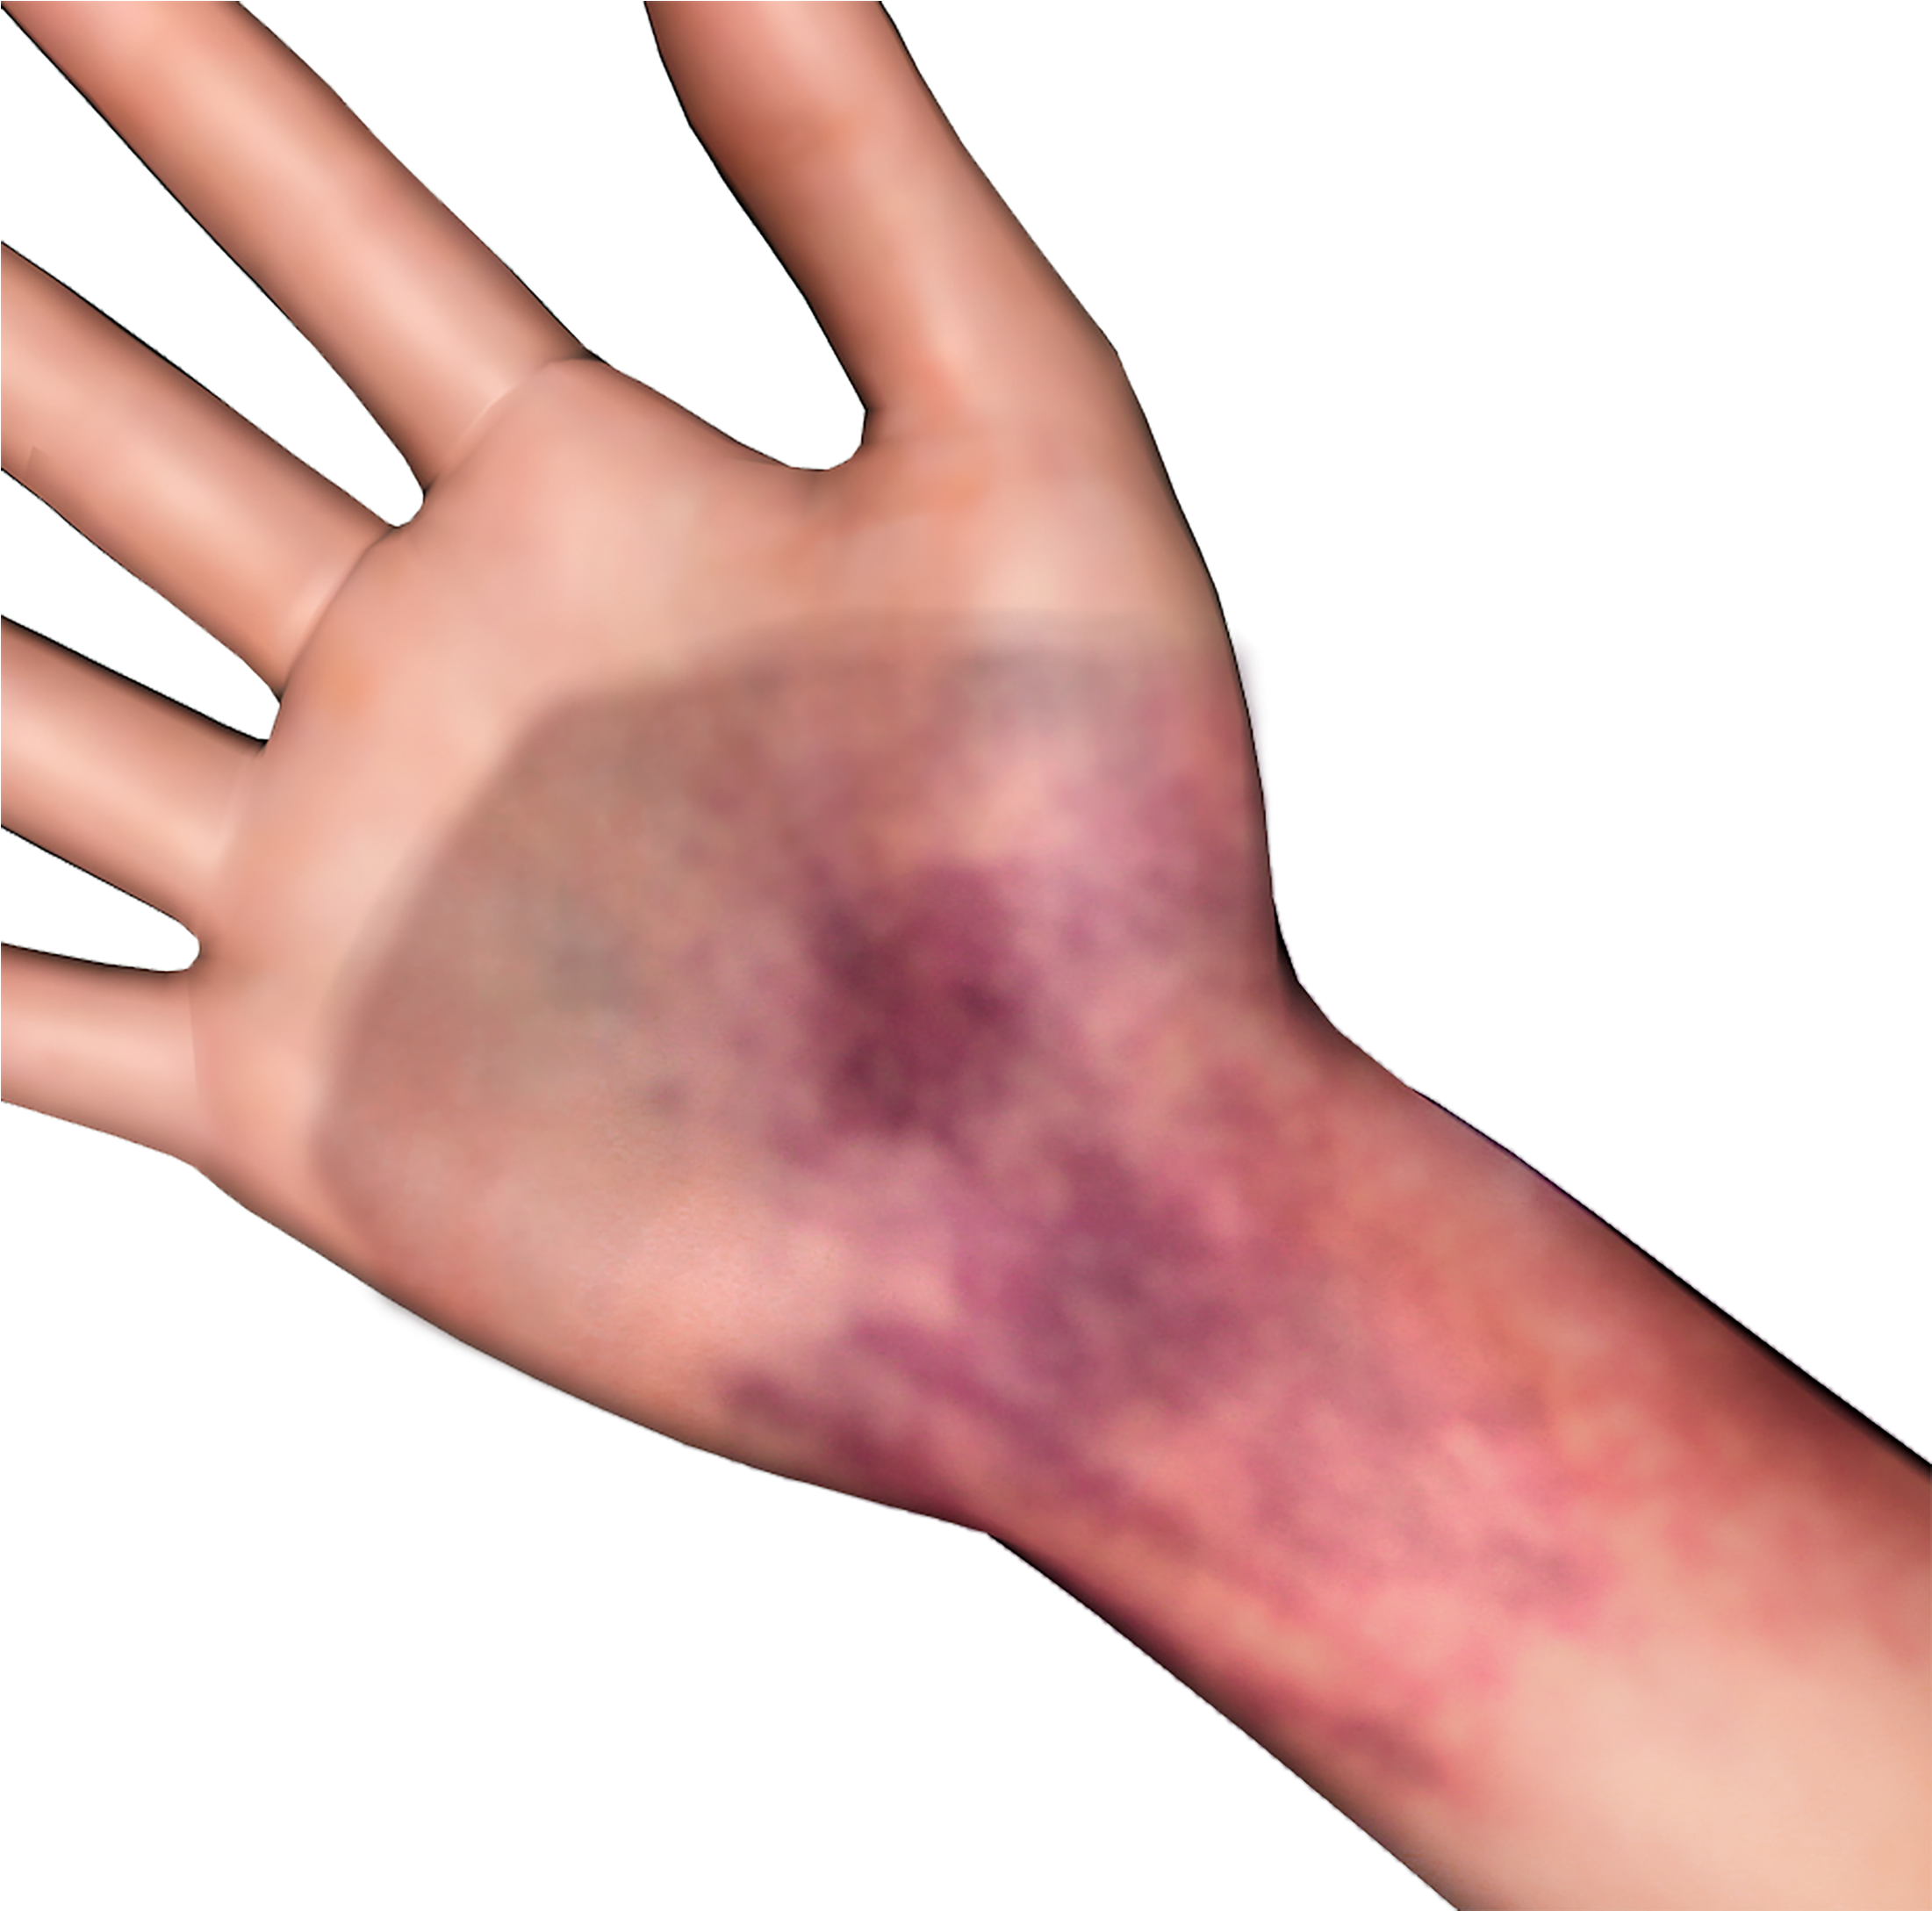 A Hand With A Bruise On It